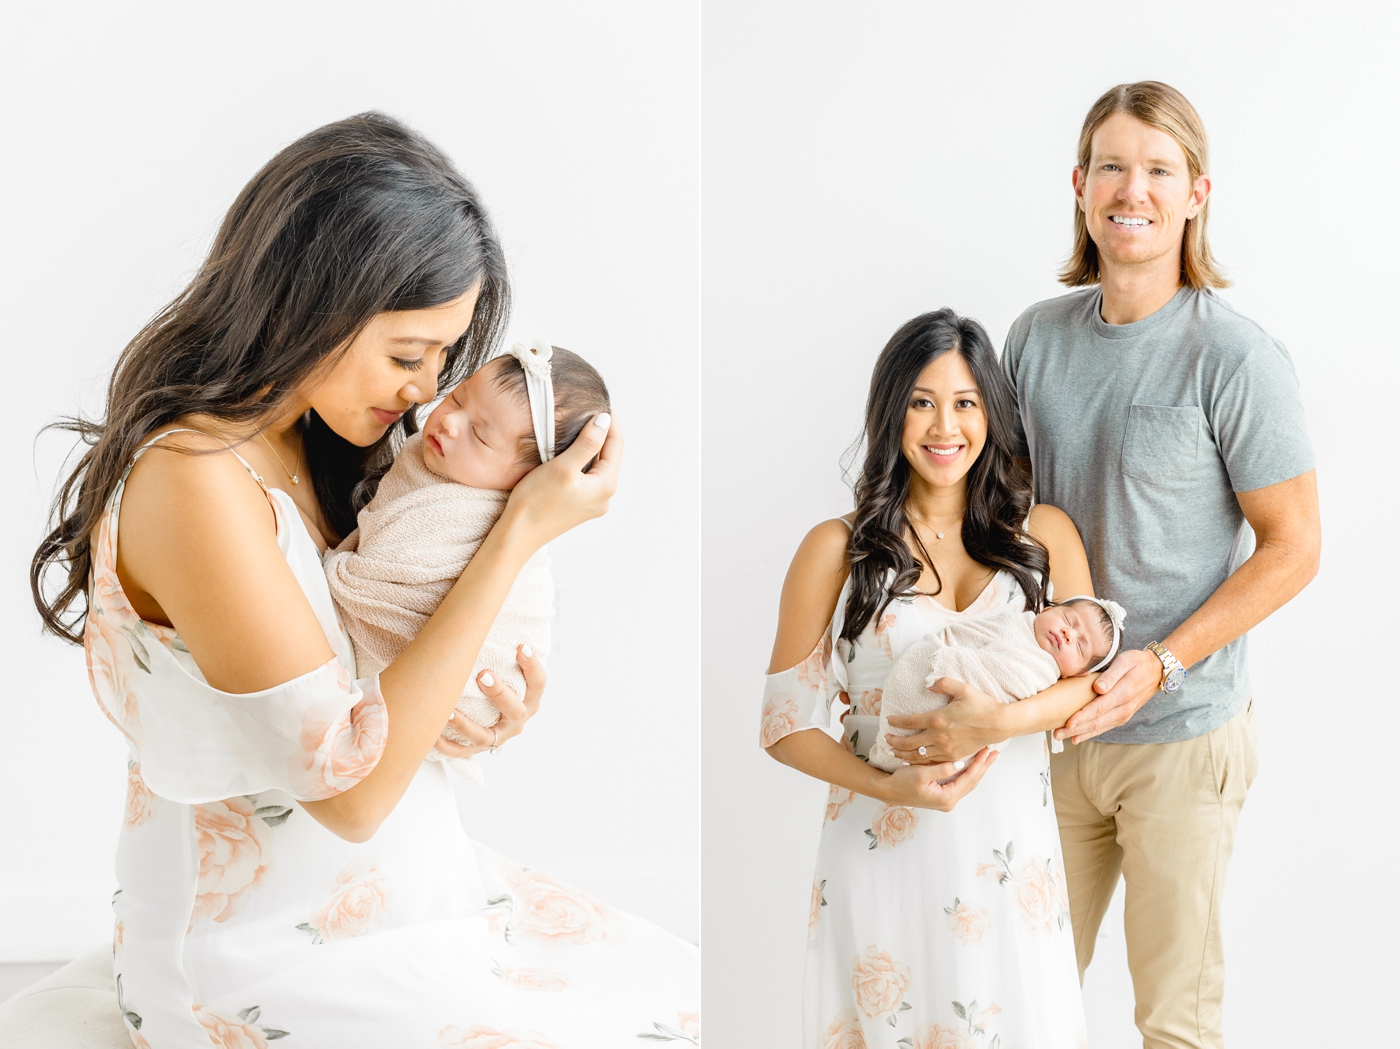 Mom and Dad holding baby girl during newborn session in Austin studio. Photos by Sana Ahmed Photography.